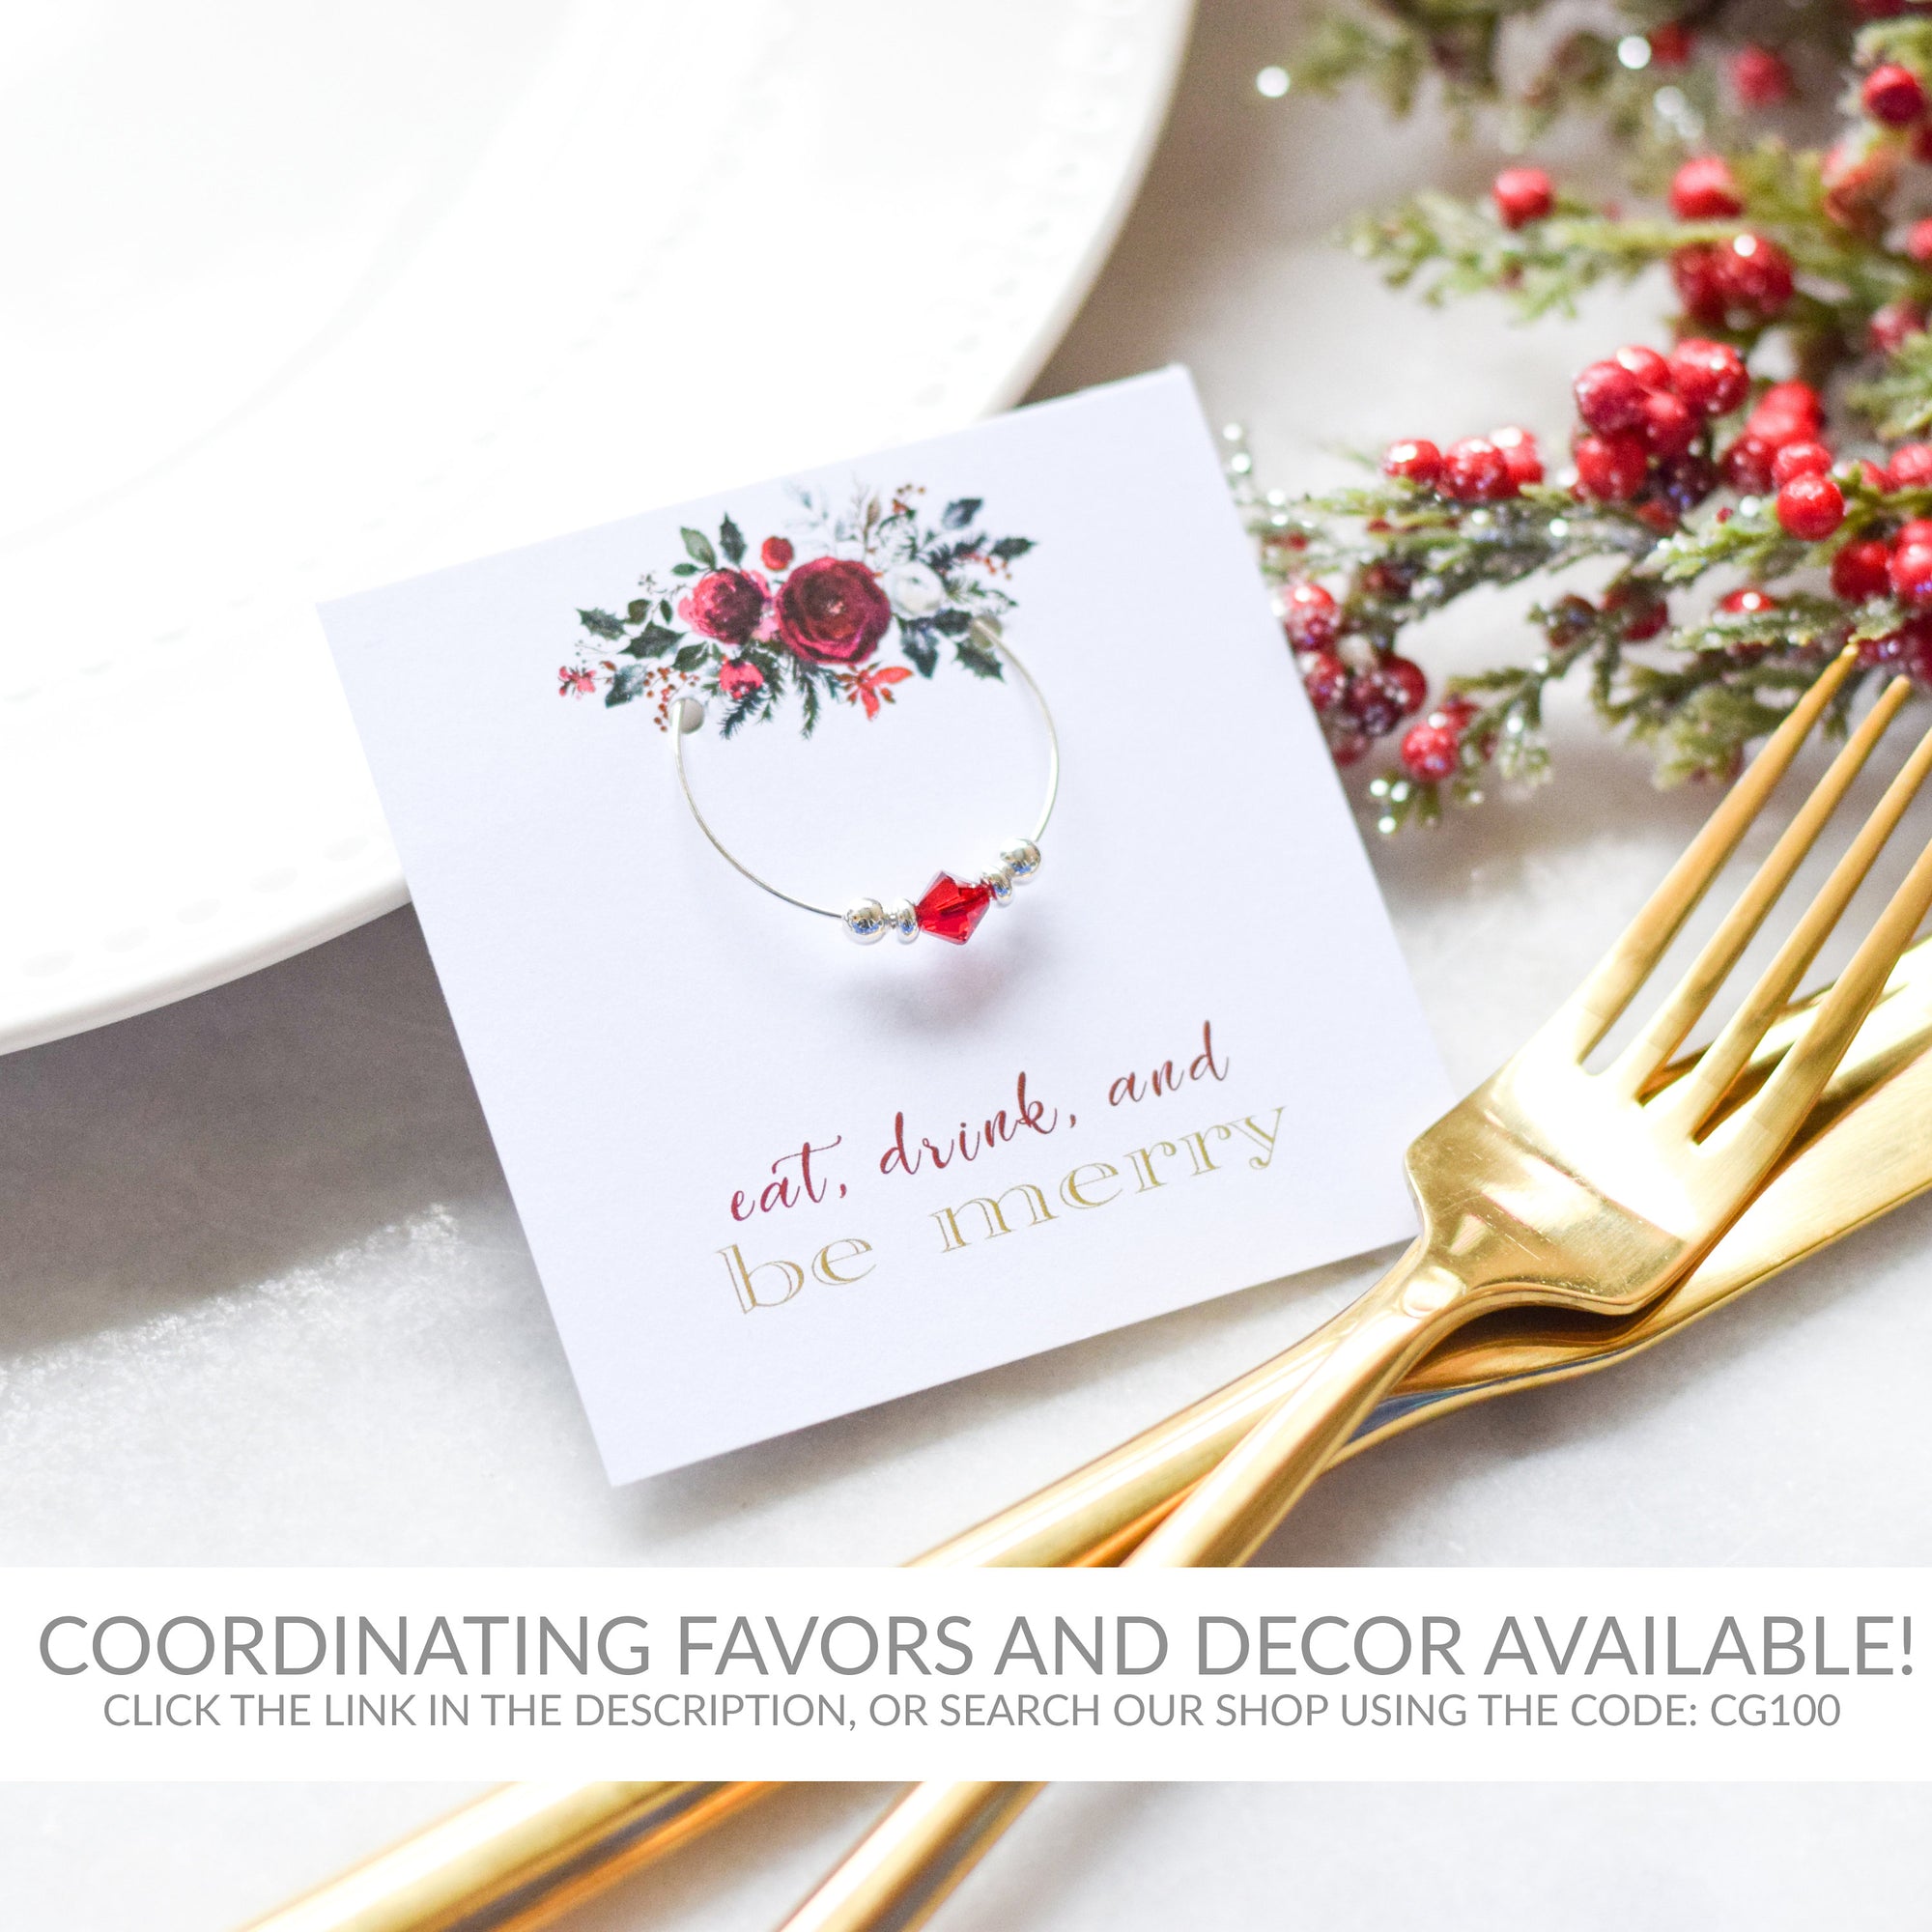 Christmas Party Food Sign Printable, Christmas Bridal Shower Sign, Holiday Party Printable Decorations, INSTANT DOWNLOAD - CG100 - @PlumPolkaDot 